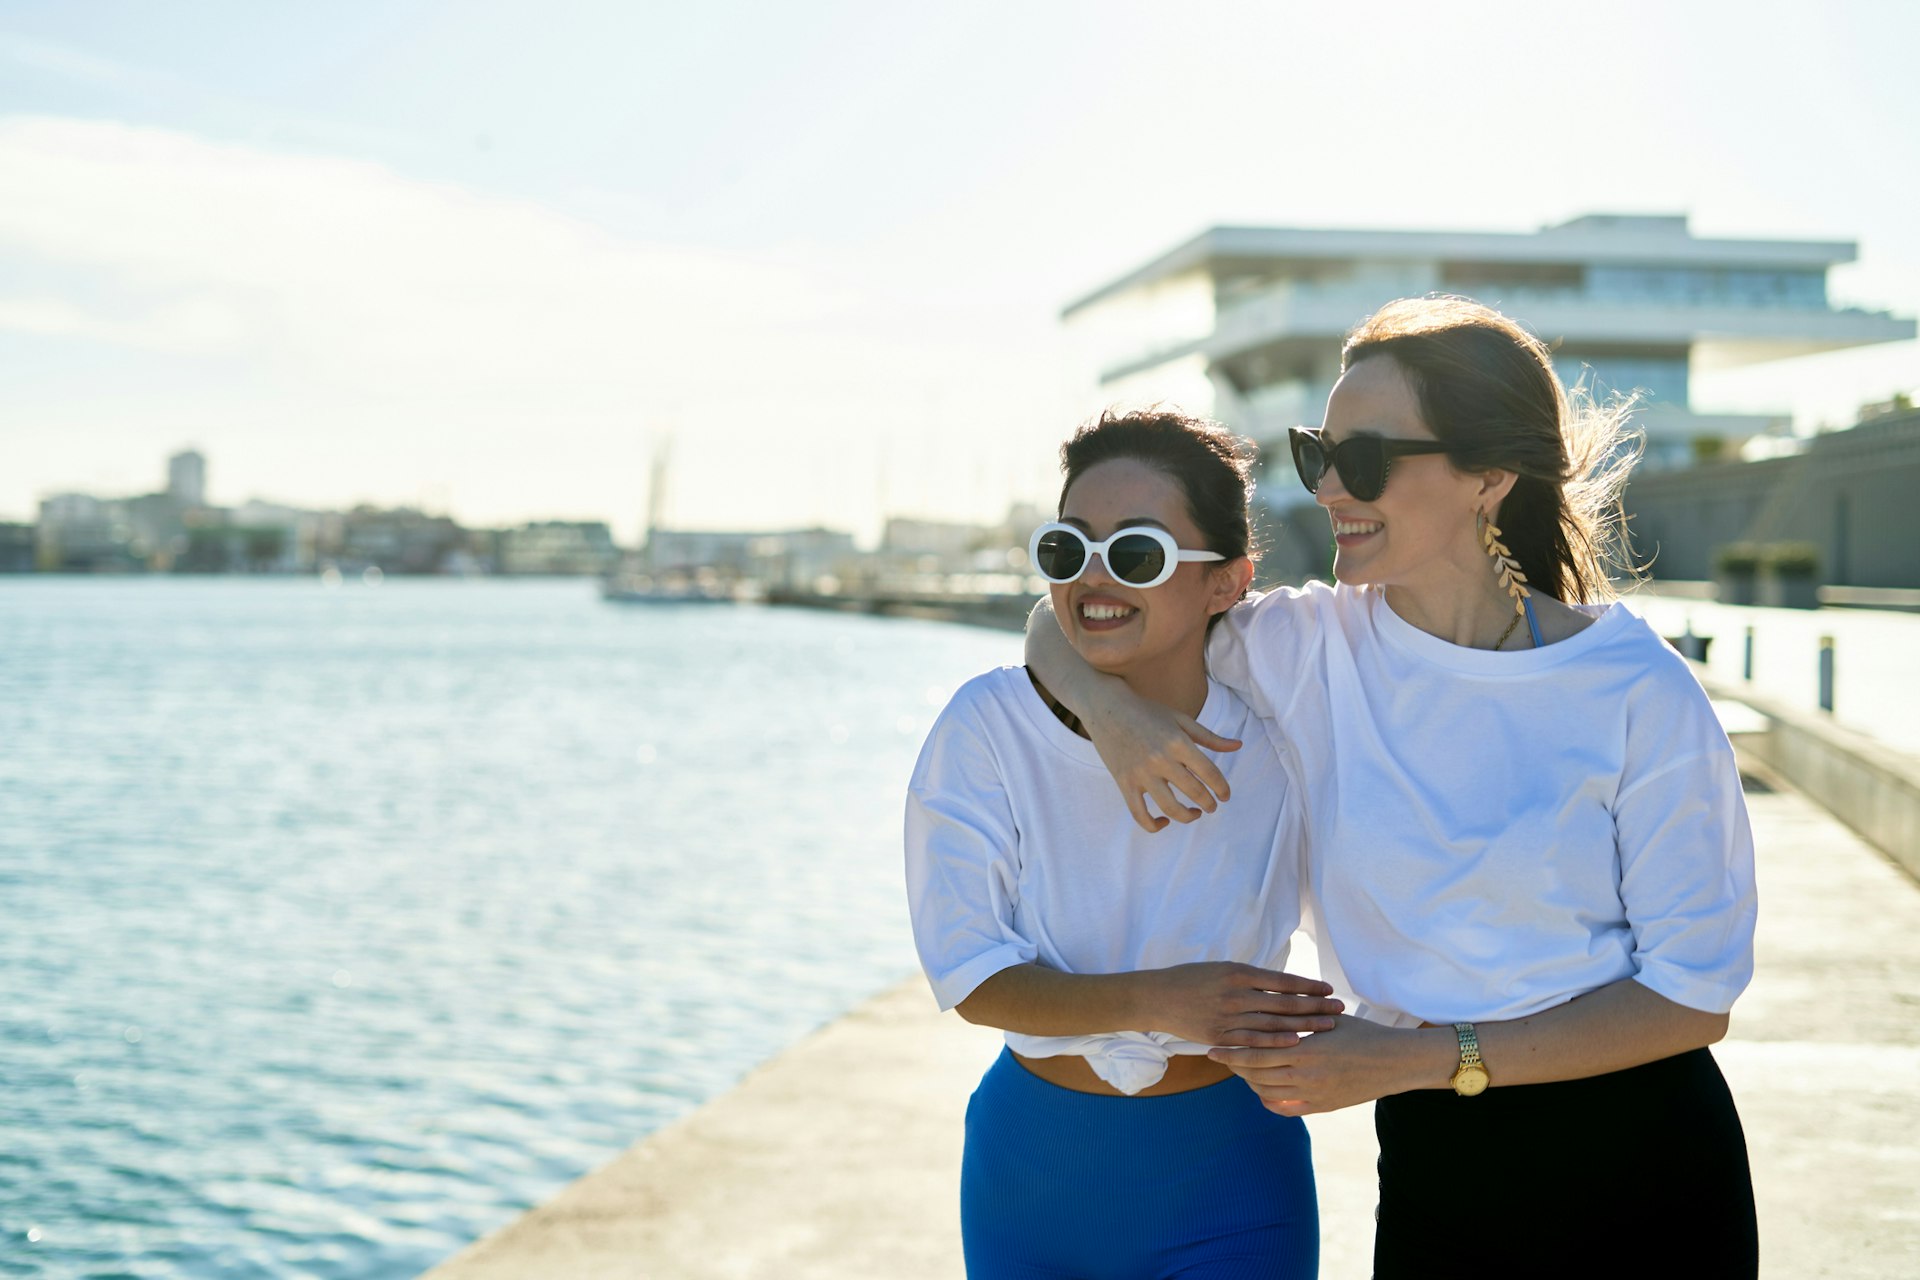 Two women walk along a city's waterfront with their arms around each other